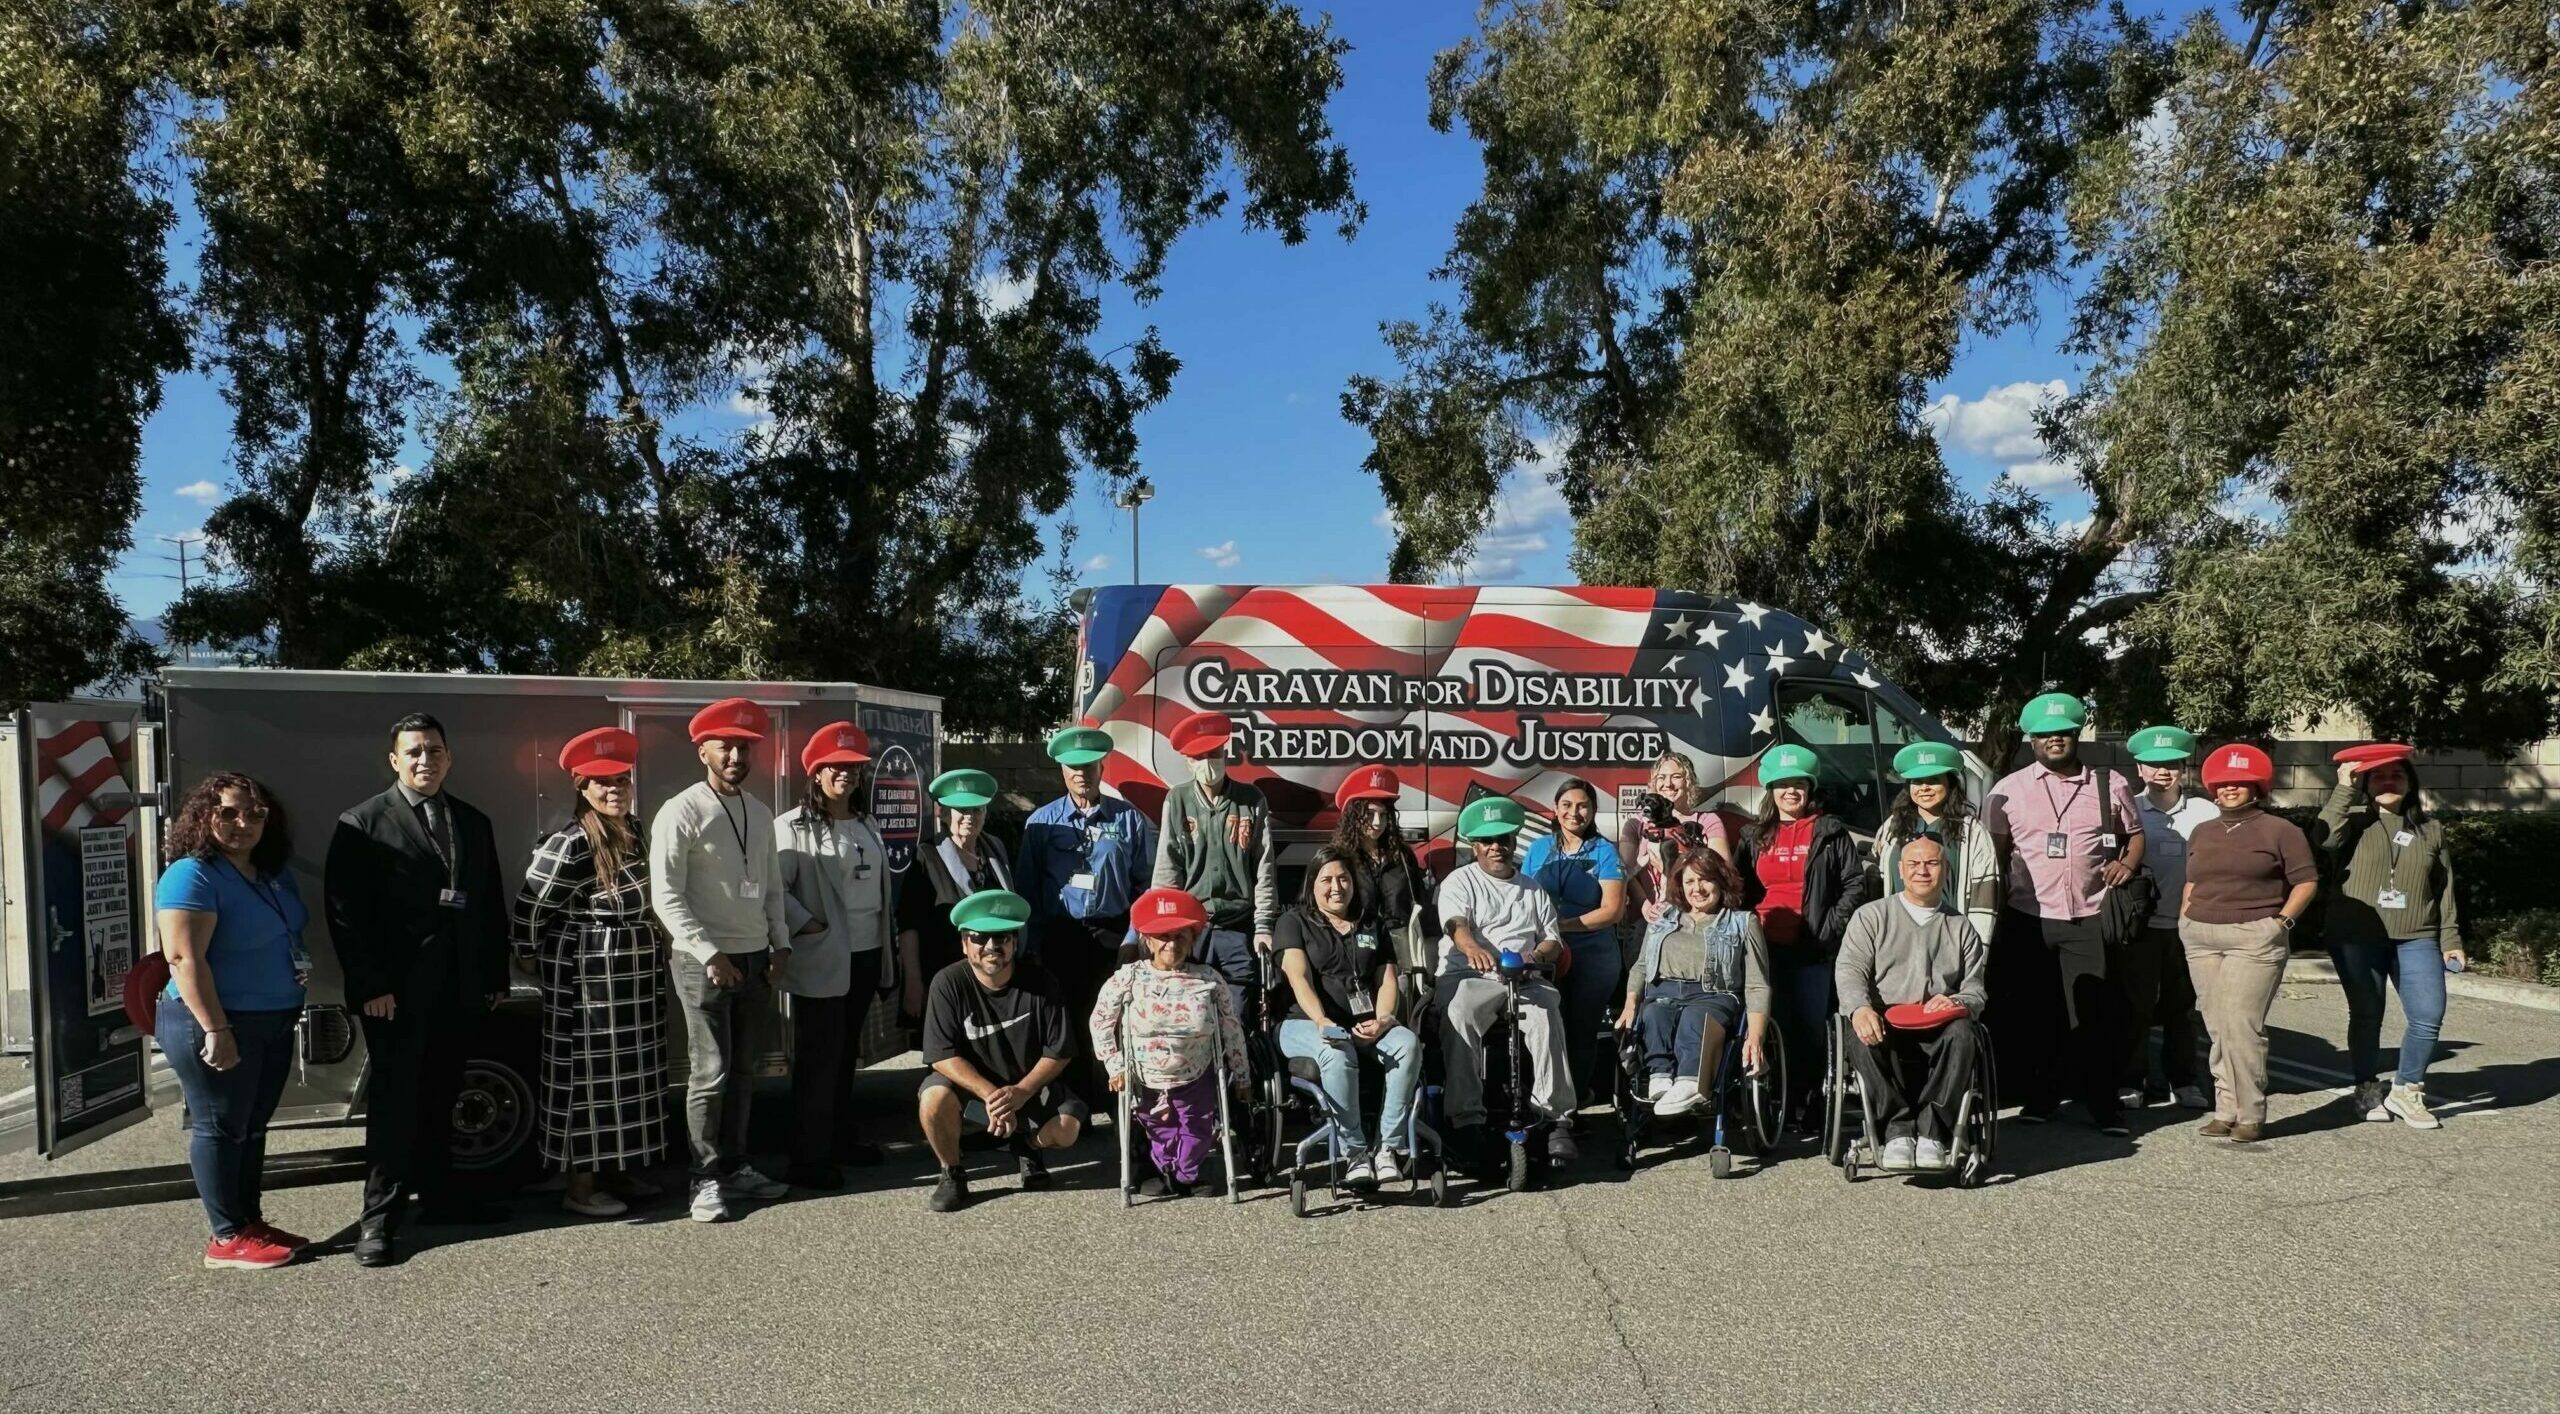 A large group photo of Rolling Start staff, board members, partners, and consumers posing together wearing Latanya Reeves hats with the Caravan for Disability Freedom and Justice van in the background